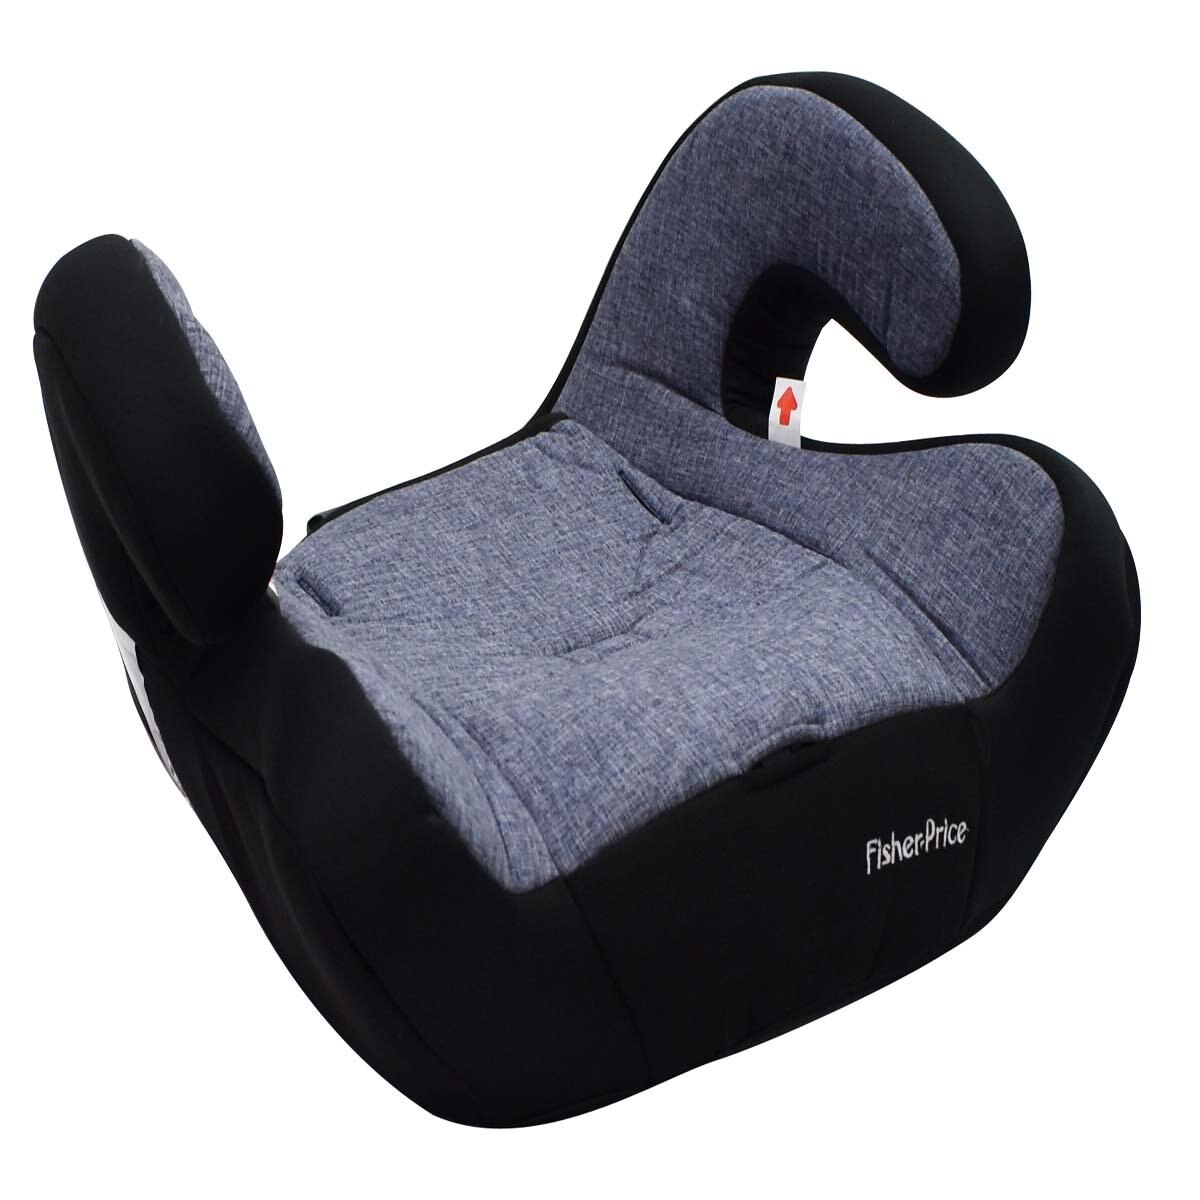 Autoasiento Booster Azul Max Fisher Price